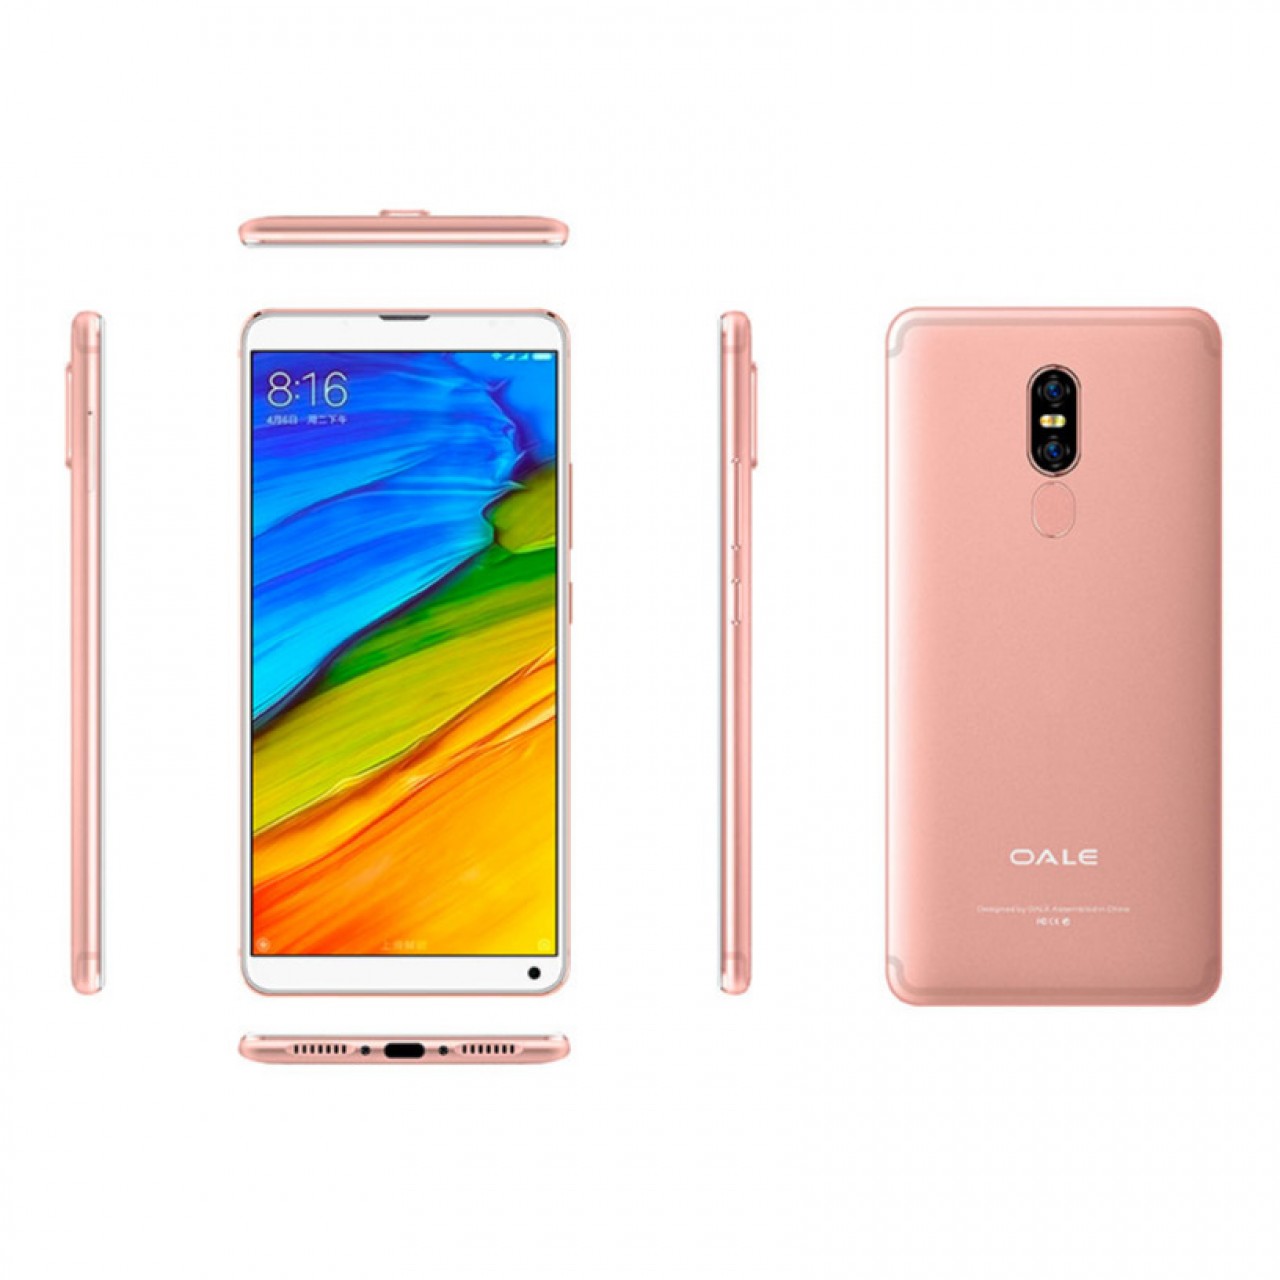 Rose Gold - APEX 1 Oale Mobile Phone Open Up New Horizons - 2GB - 32GB